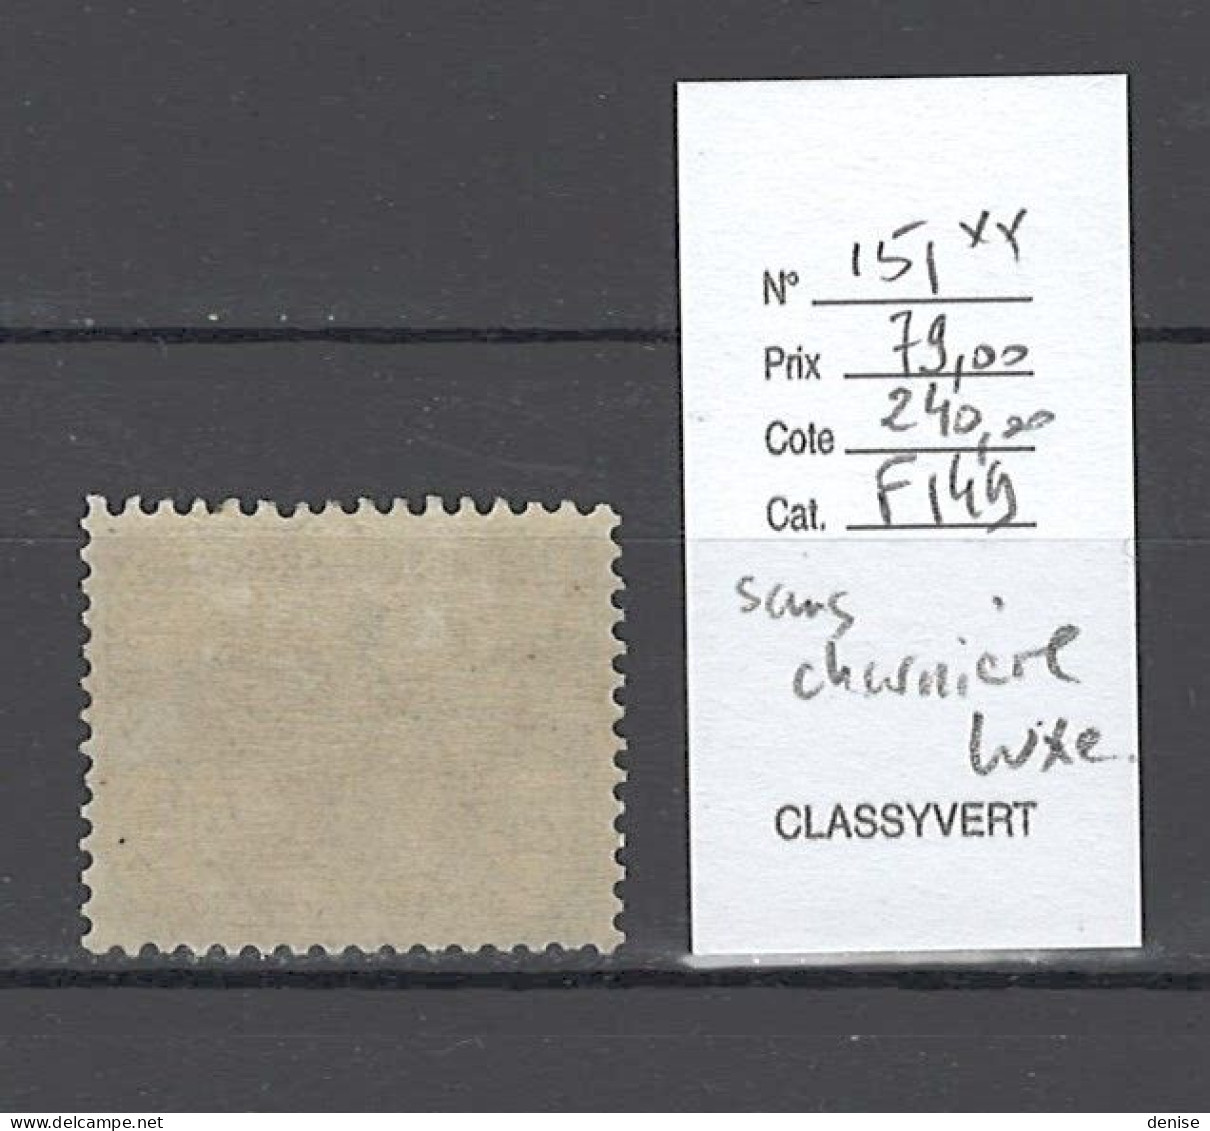 France - Yvert 151** - Orphelins 1ere Série - 25 Cts + 15 Cts - Luxe - Ungebraucht